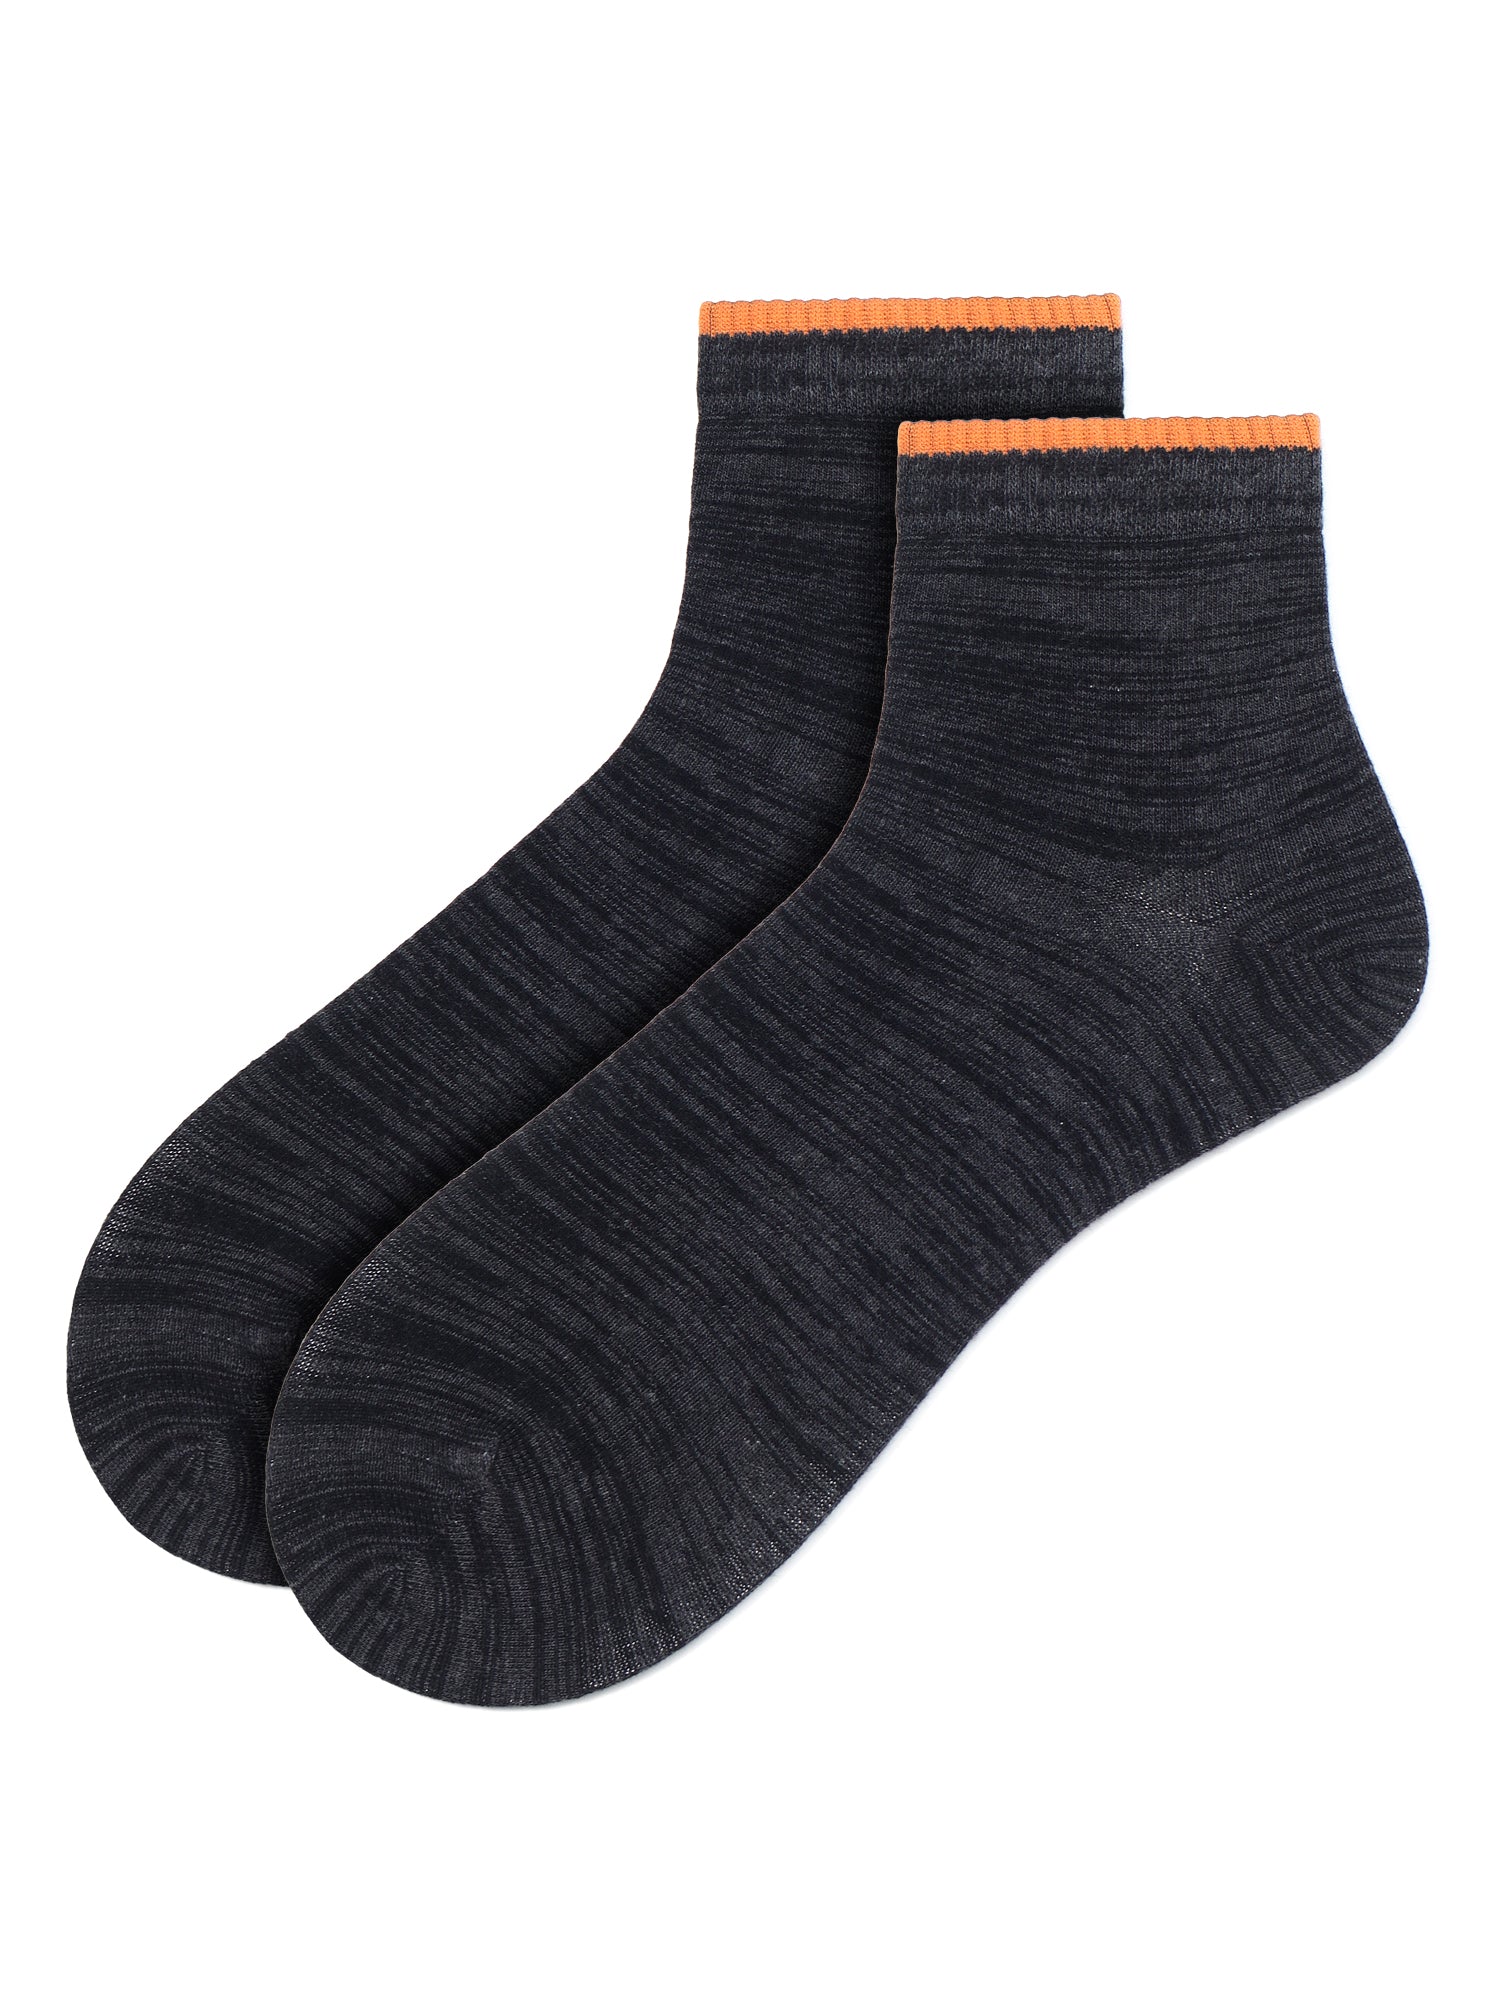 Tipped to Perfection - Twintone Black with Orange Tip Socks